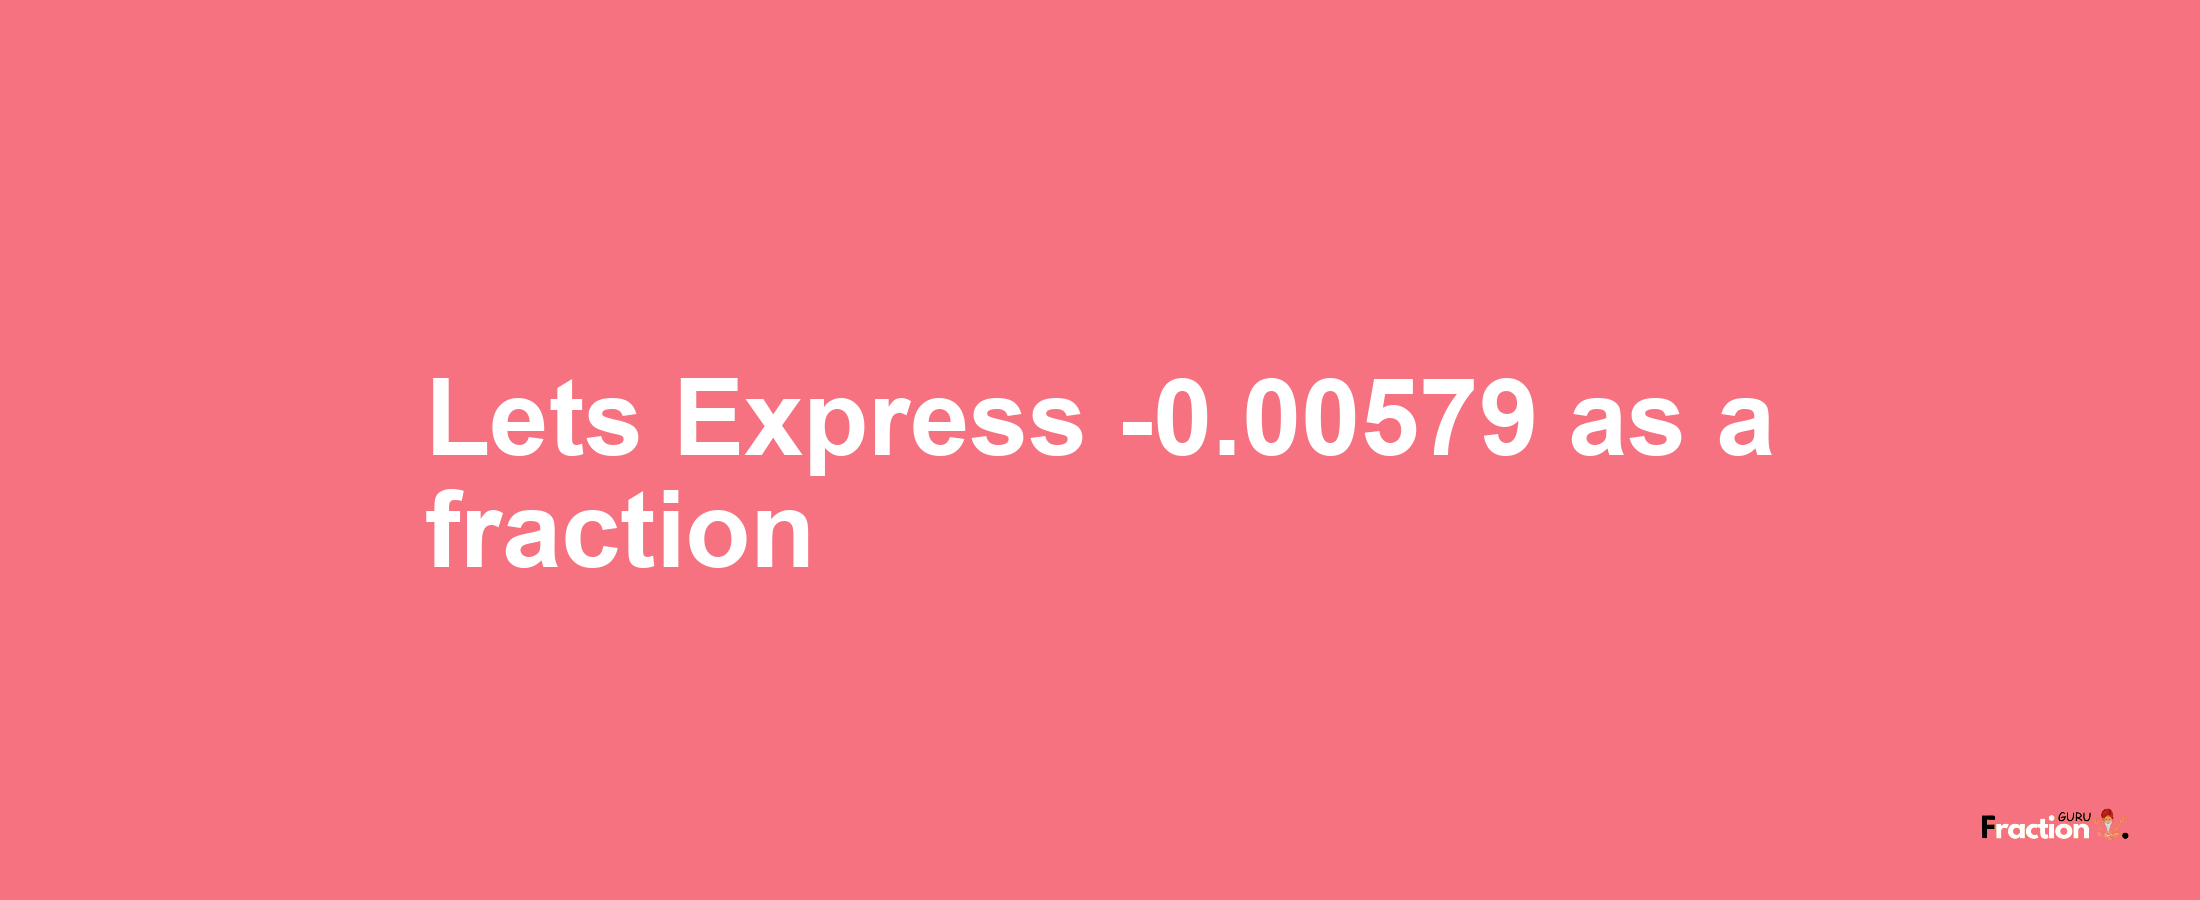 Lets Express -0.00579 as afraction